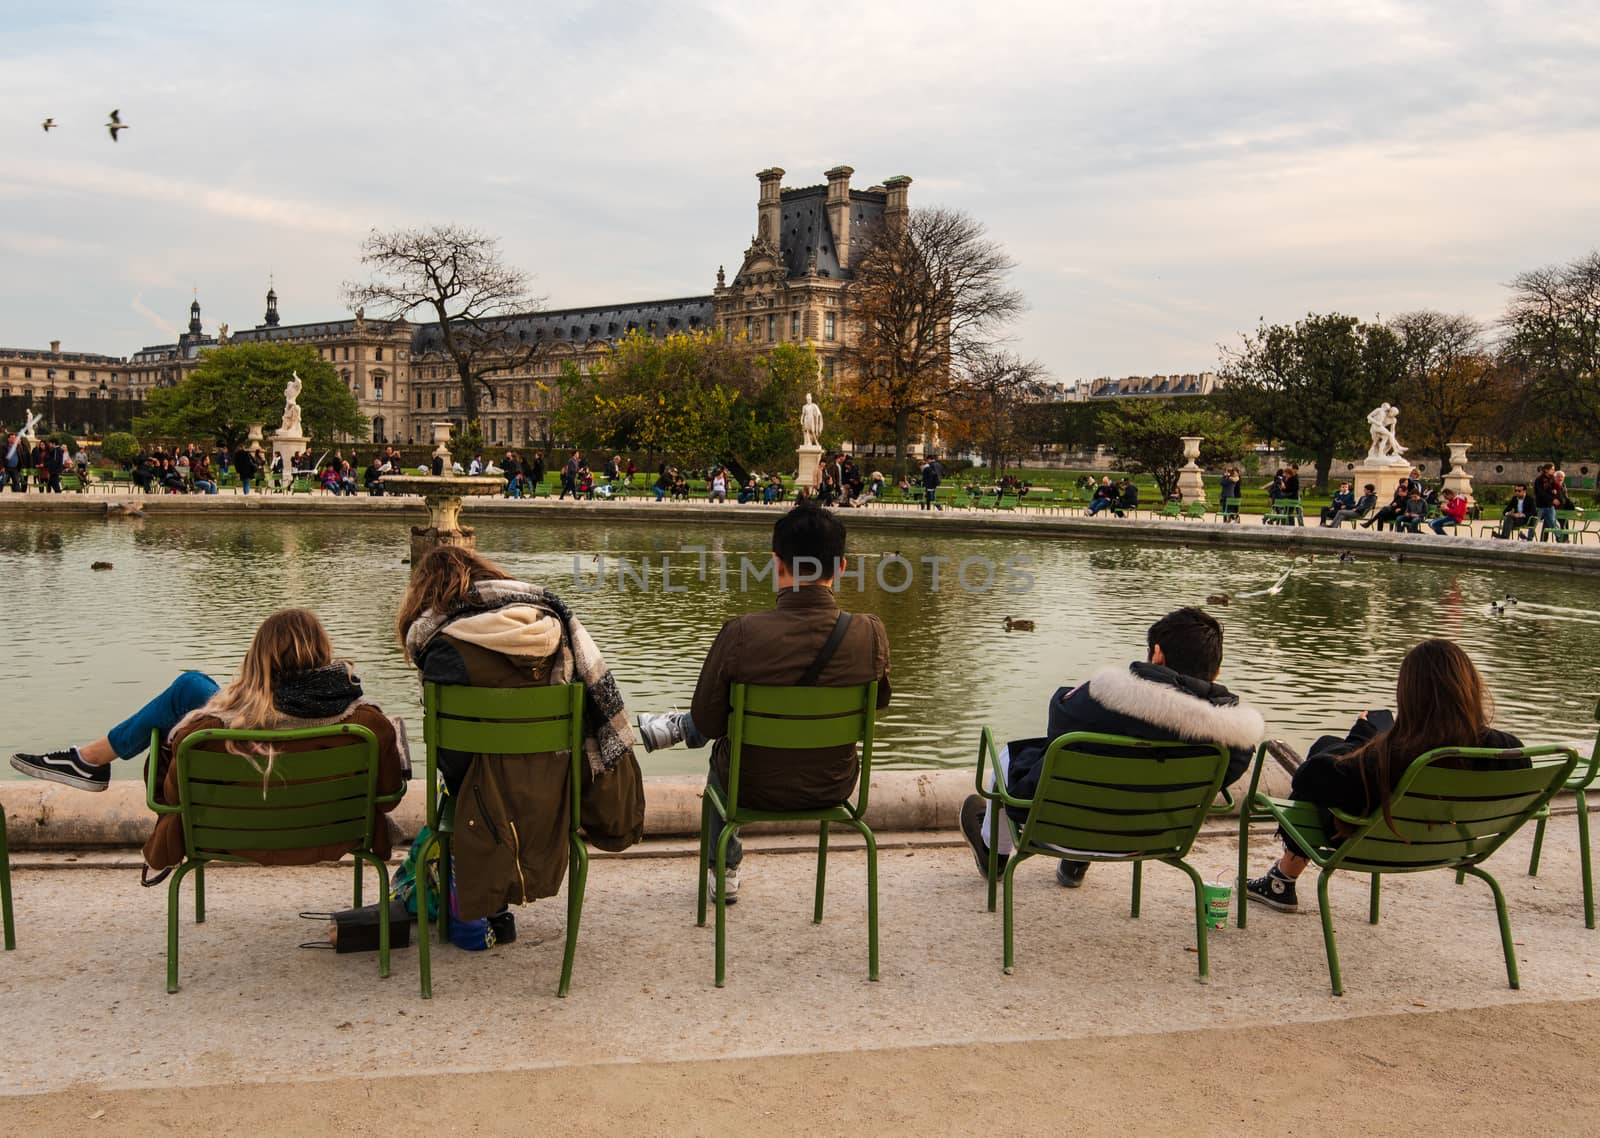 Relaxing in the Tuileries by jfbenning